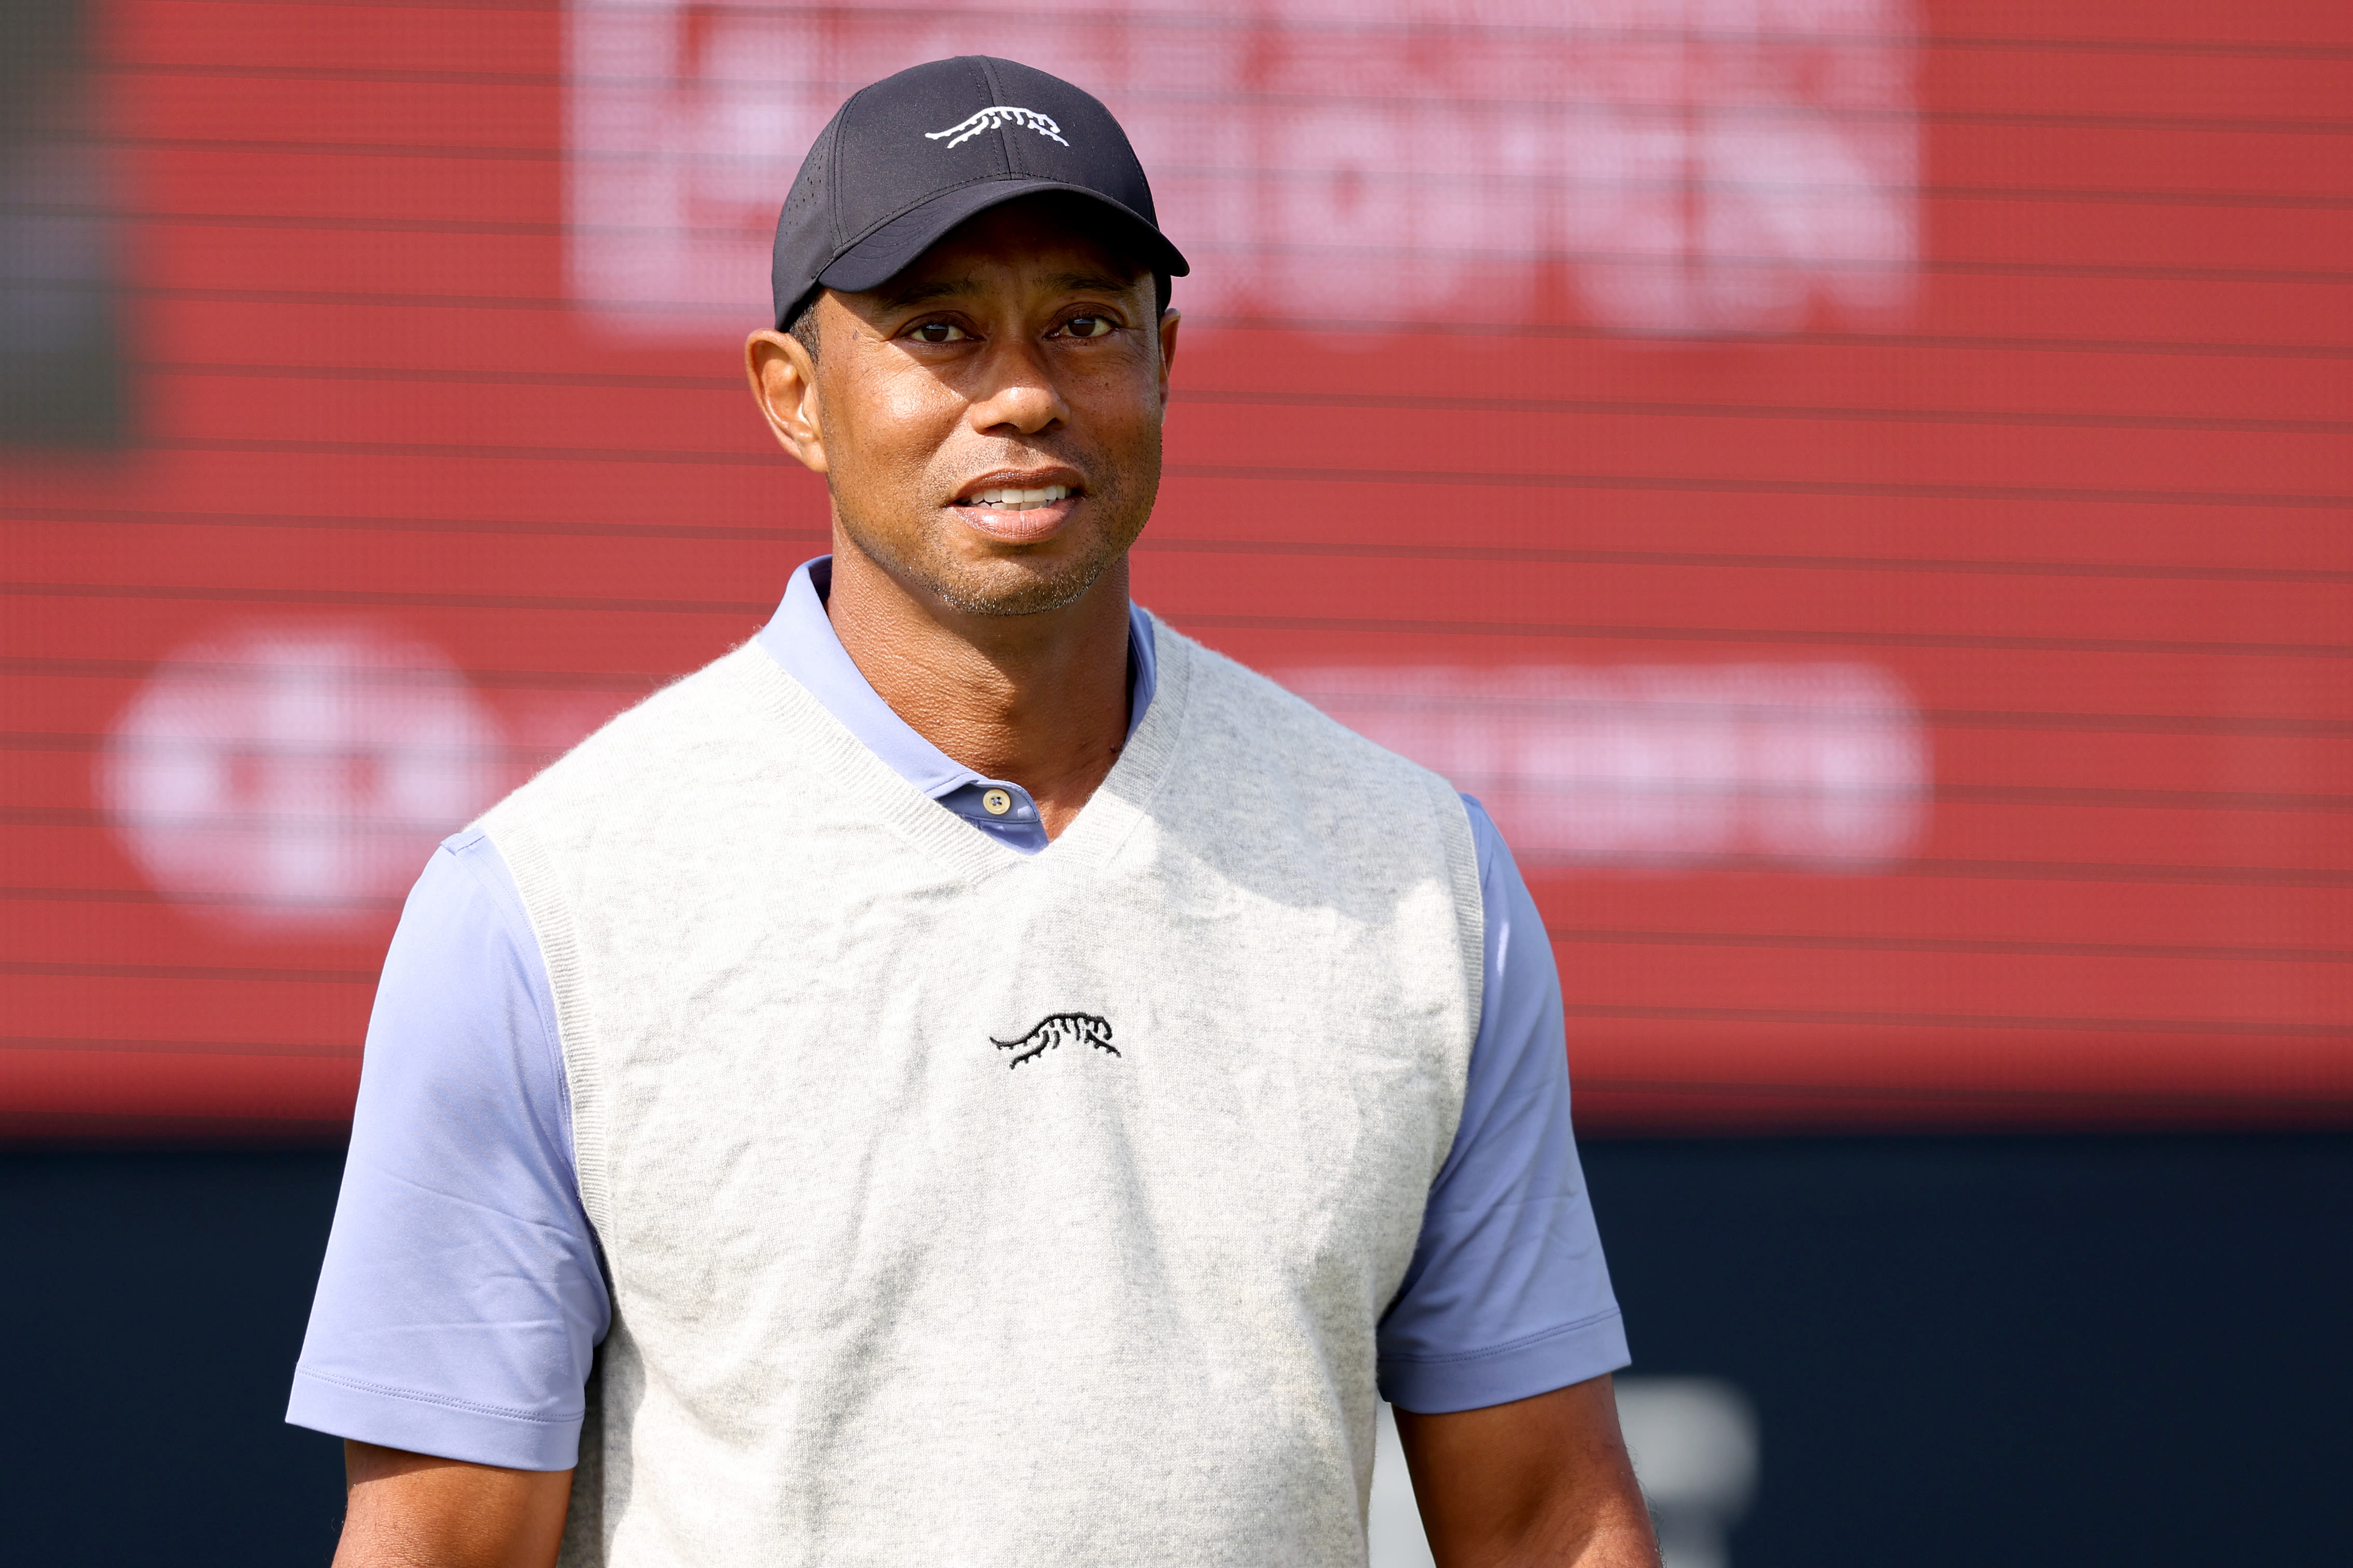 British Open Rounds 1 and 2 tee times: Follow Tiger Woods, Rory McIlroy and others early at Royal Troon